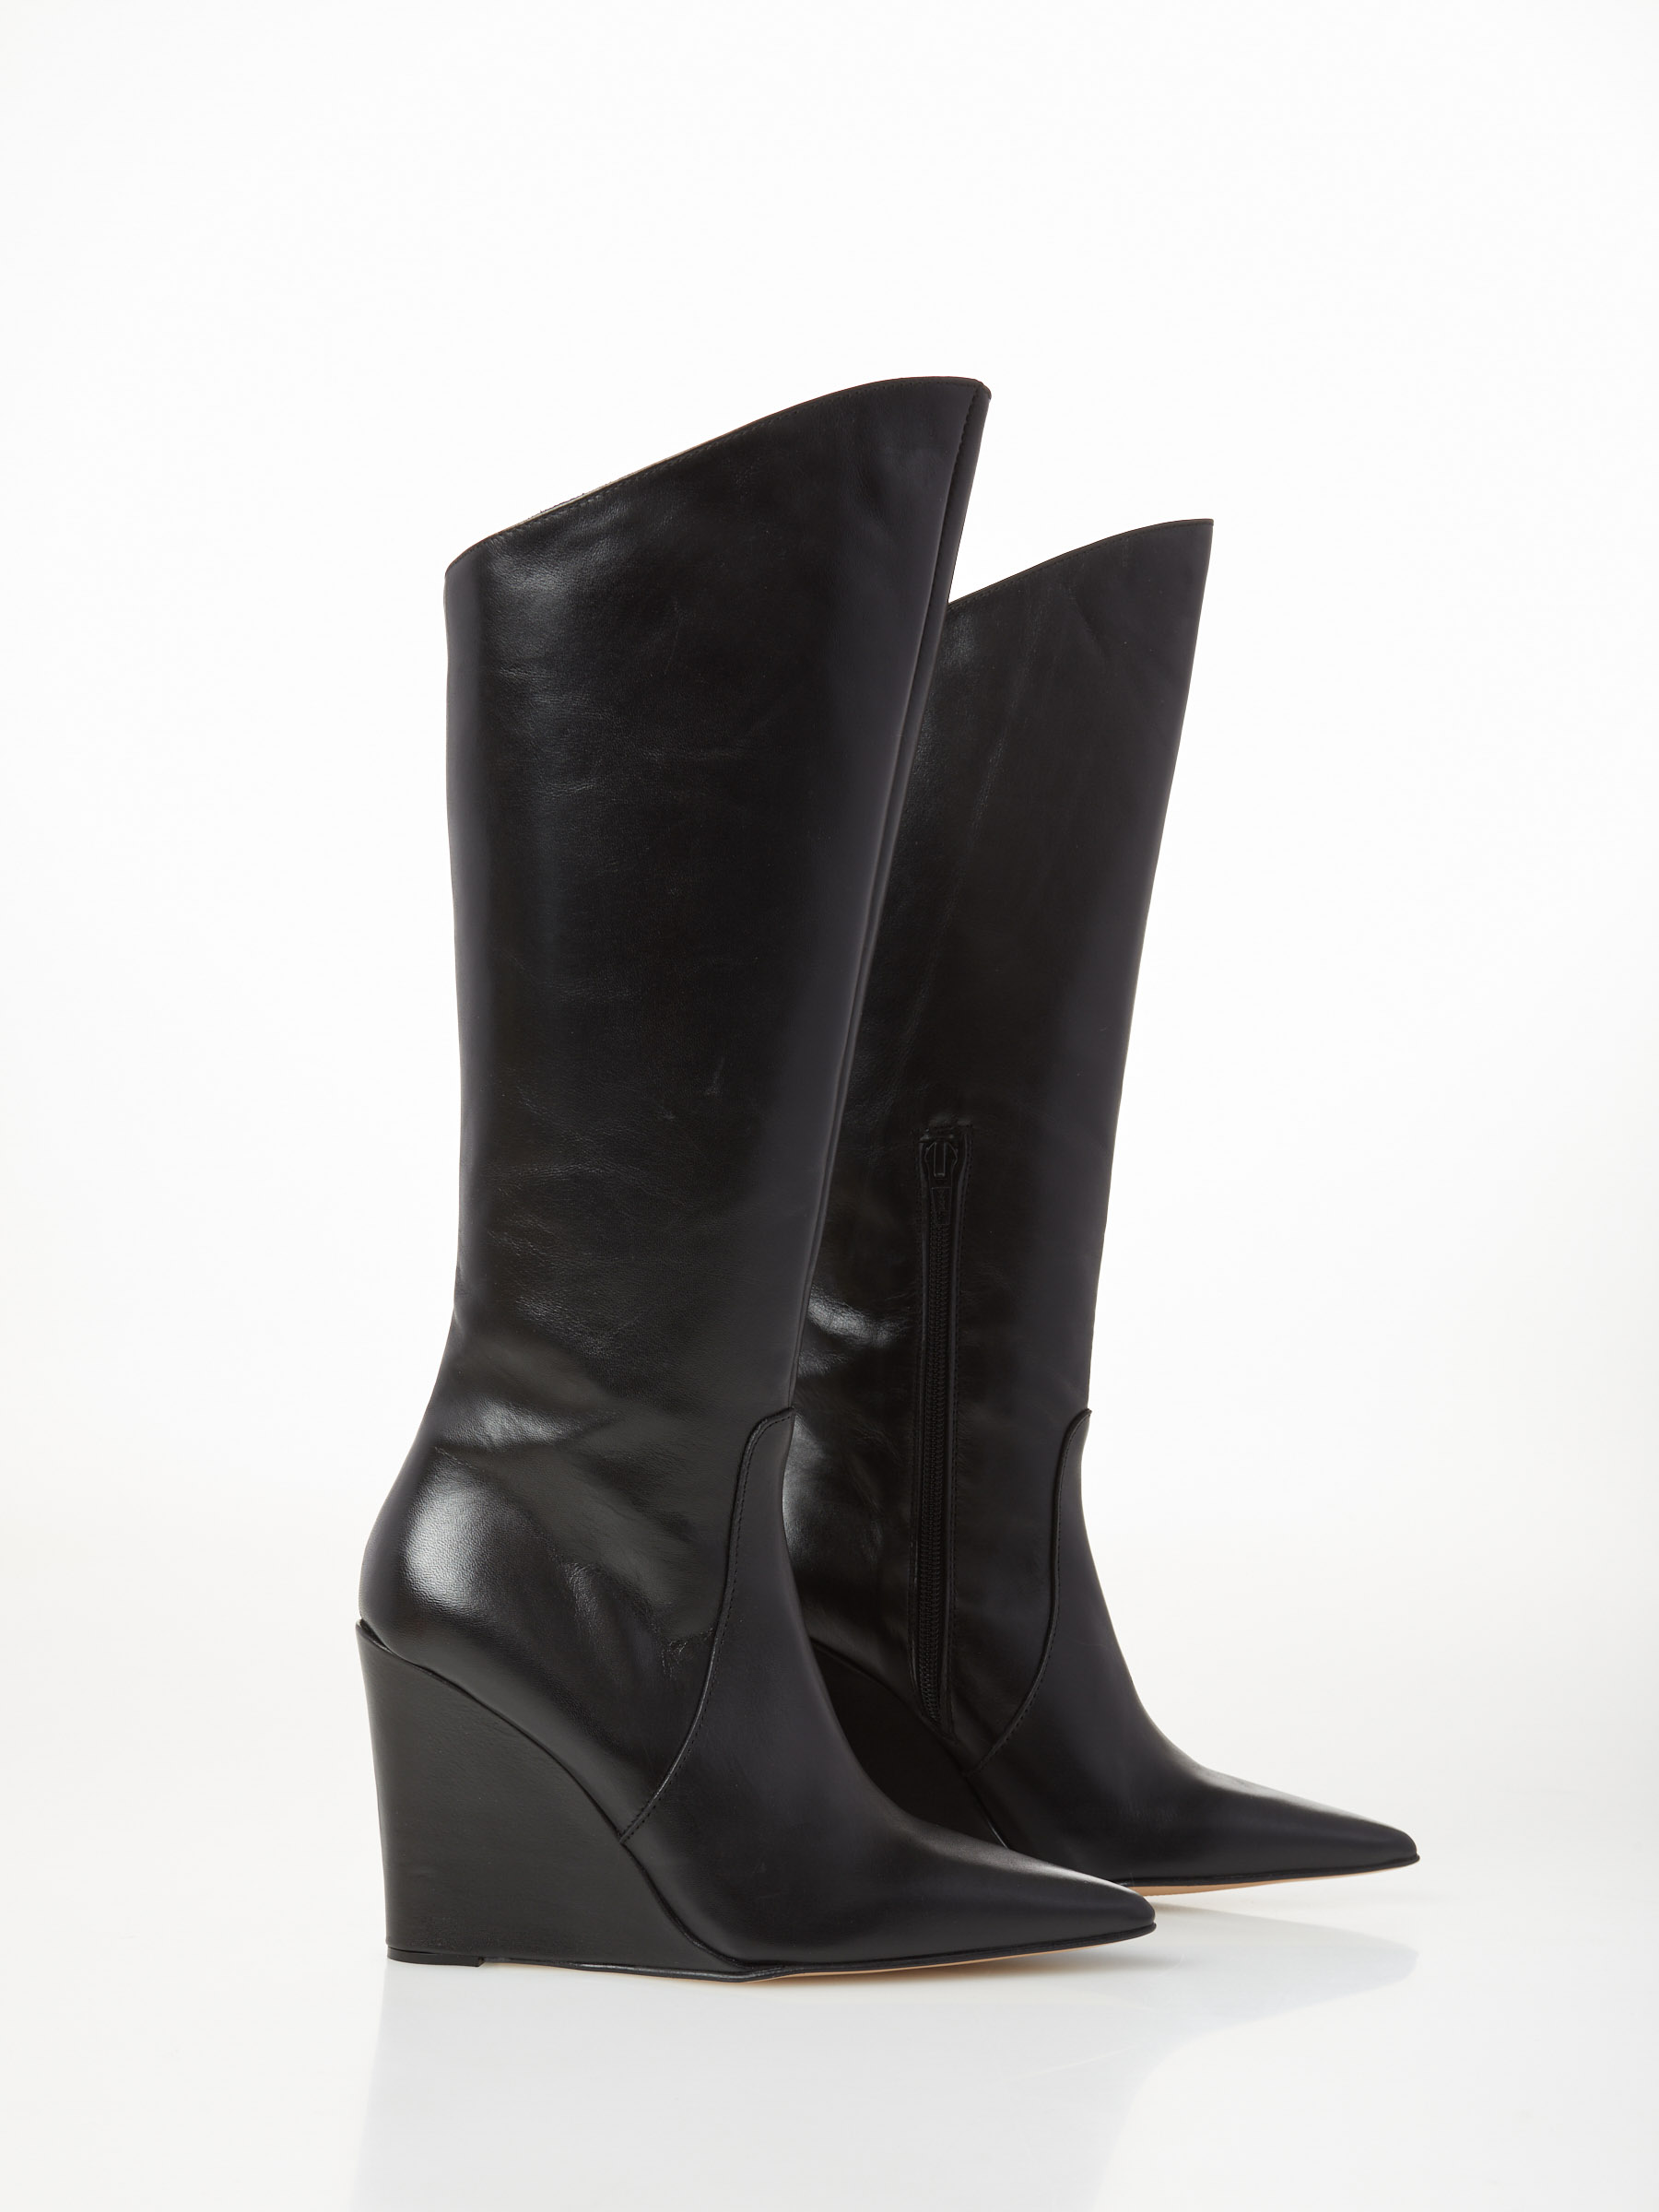 Leather Wedge Boot